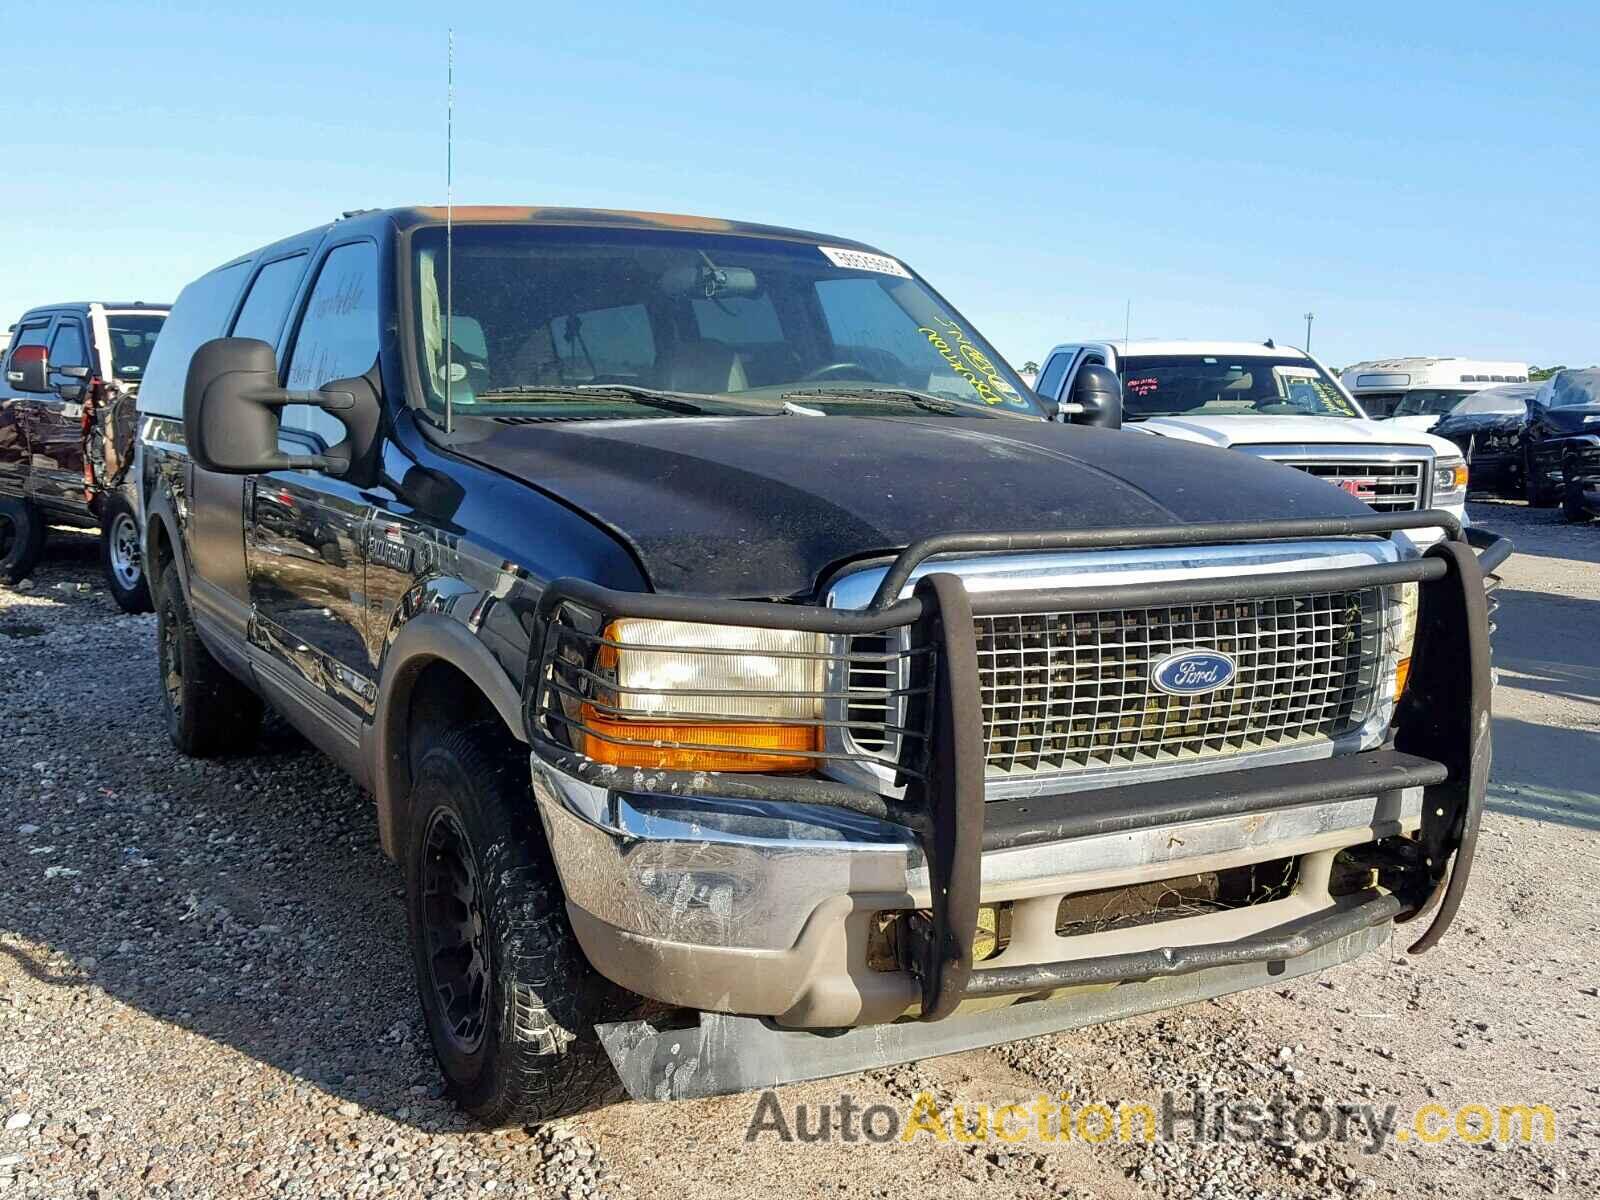 2000 FORD EXCURSION LIMITED, 1FMNU42S9YEA08432